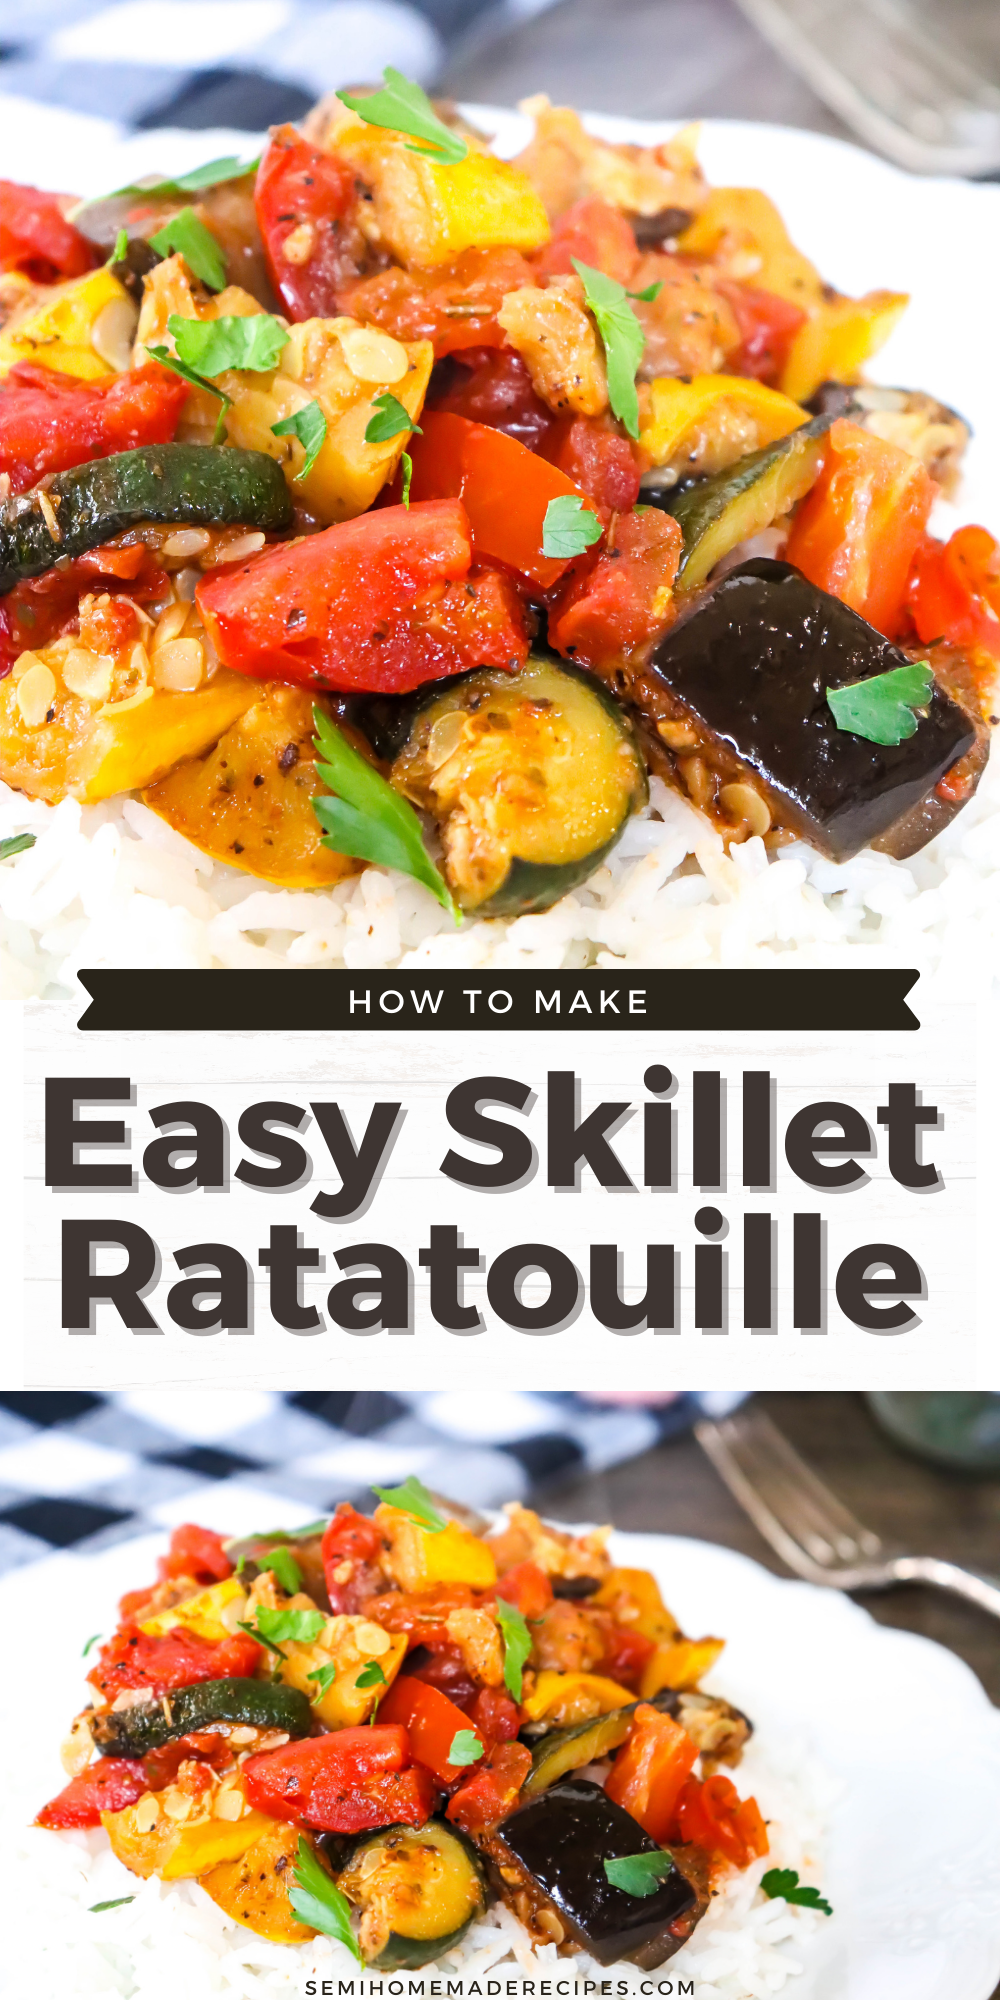 This Easy Skillet Ratatouille is my simple version of the famous French stewed vegetable dish of Ratatouille. This dish is made up of cooked summer yellow squash, zucchini, tomatoes and seasonings. A great recipe for using up those summer vegetables. 